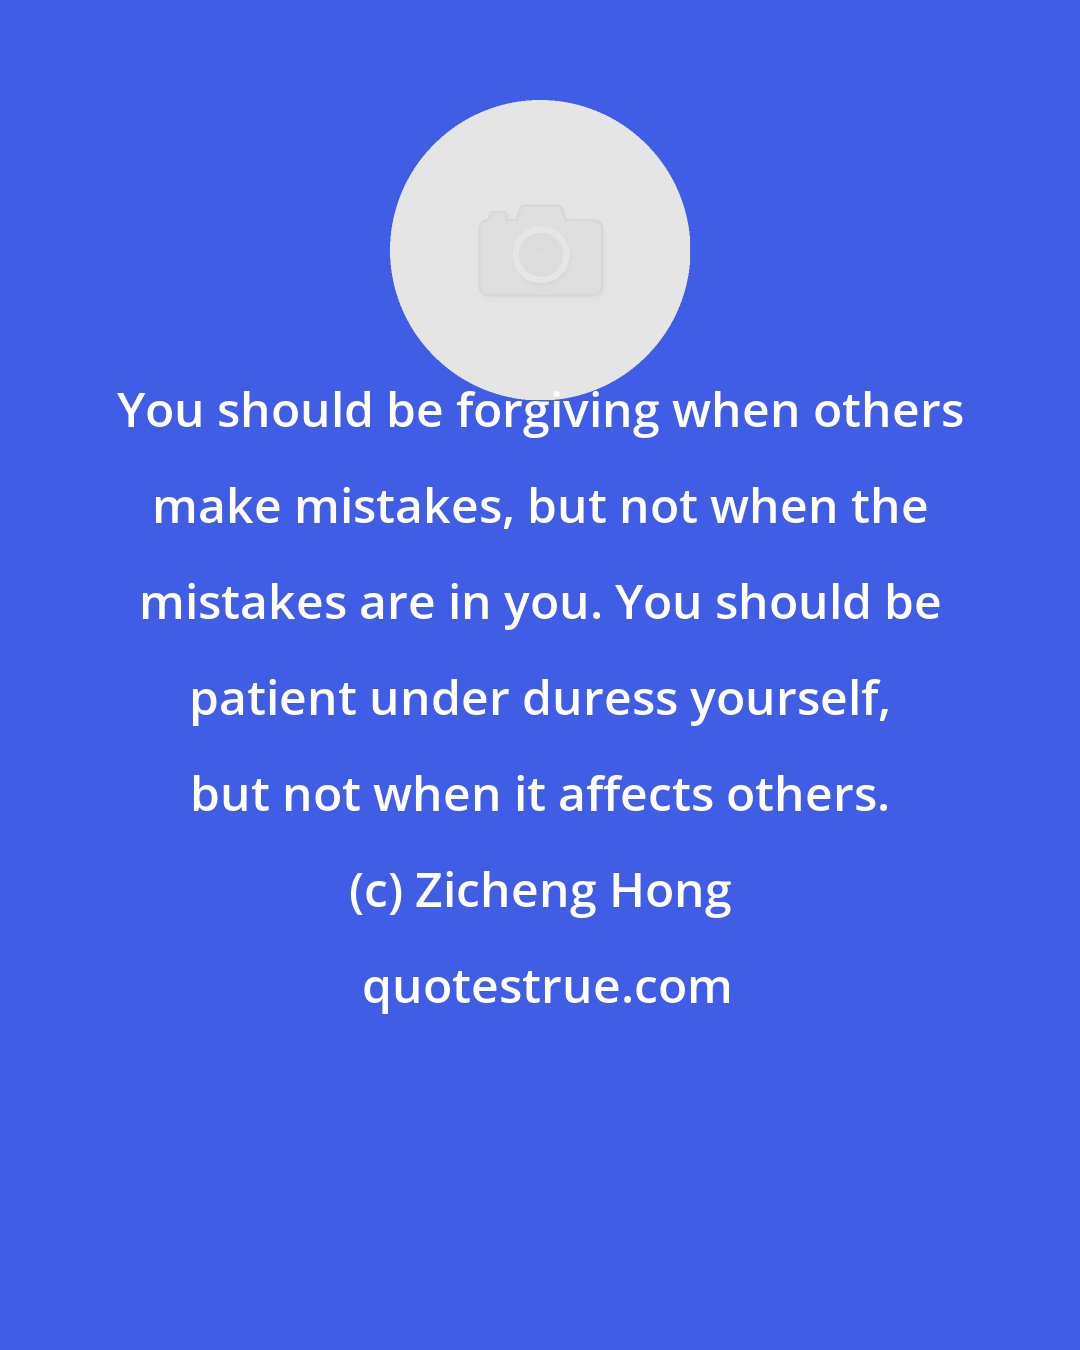 Zicheng Hong: You should be forgiving when others make mistakes, but not when the mistakes are in you. You should be patient under duress yourself, but not when it affects others.